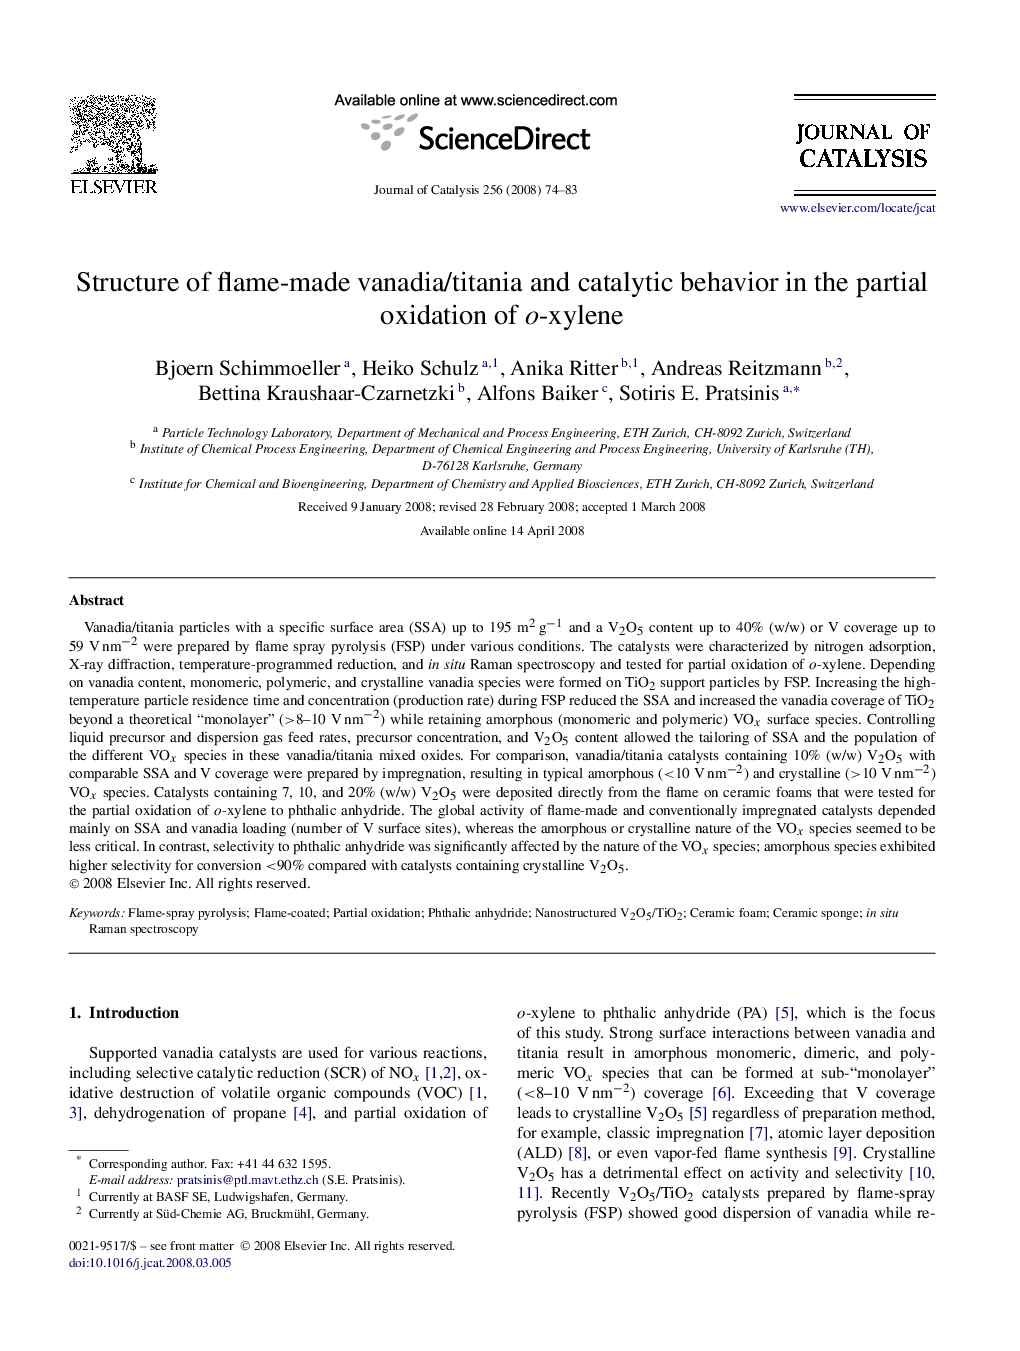 Structure of flame-made vanadia/titania and catalytic behavior in the partial oxidation of o-xylene